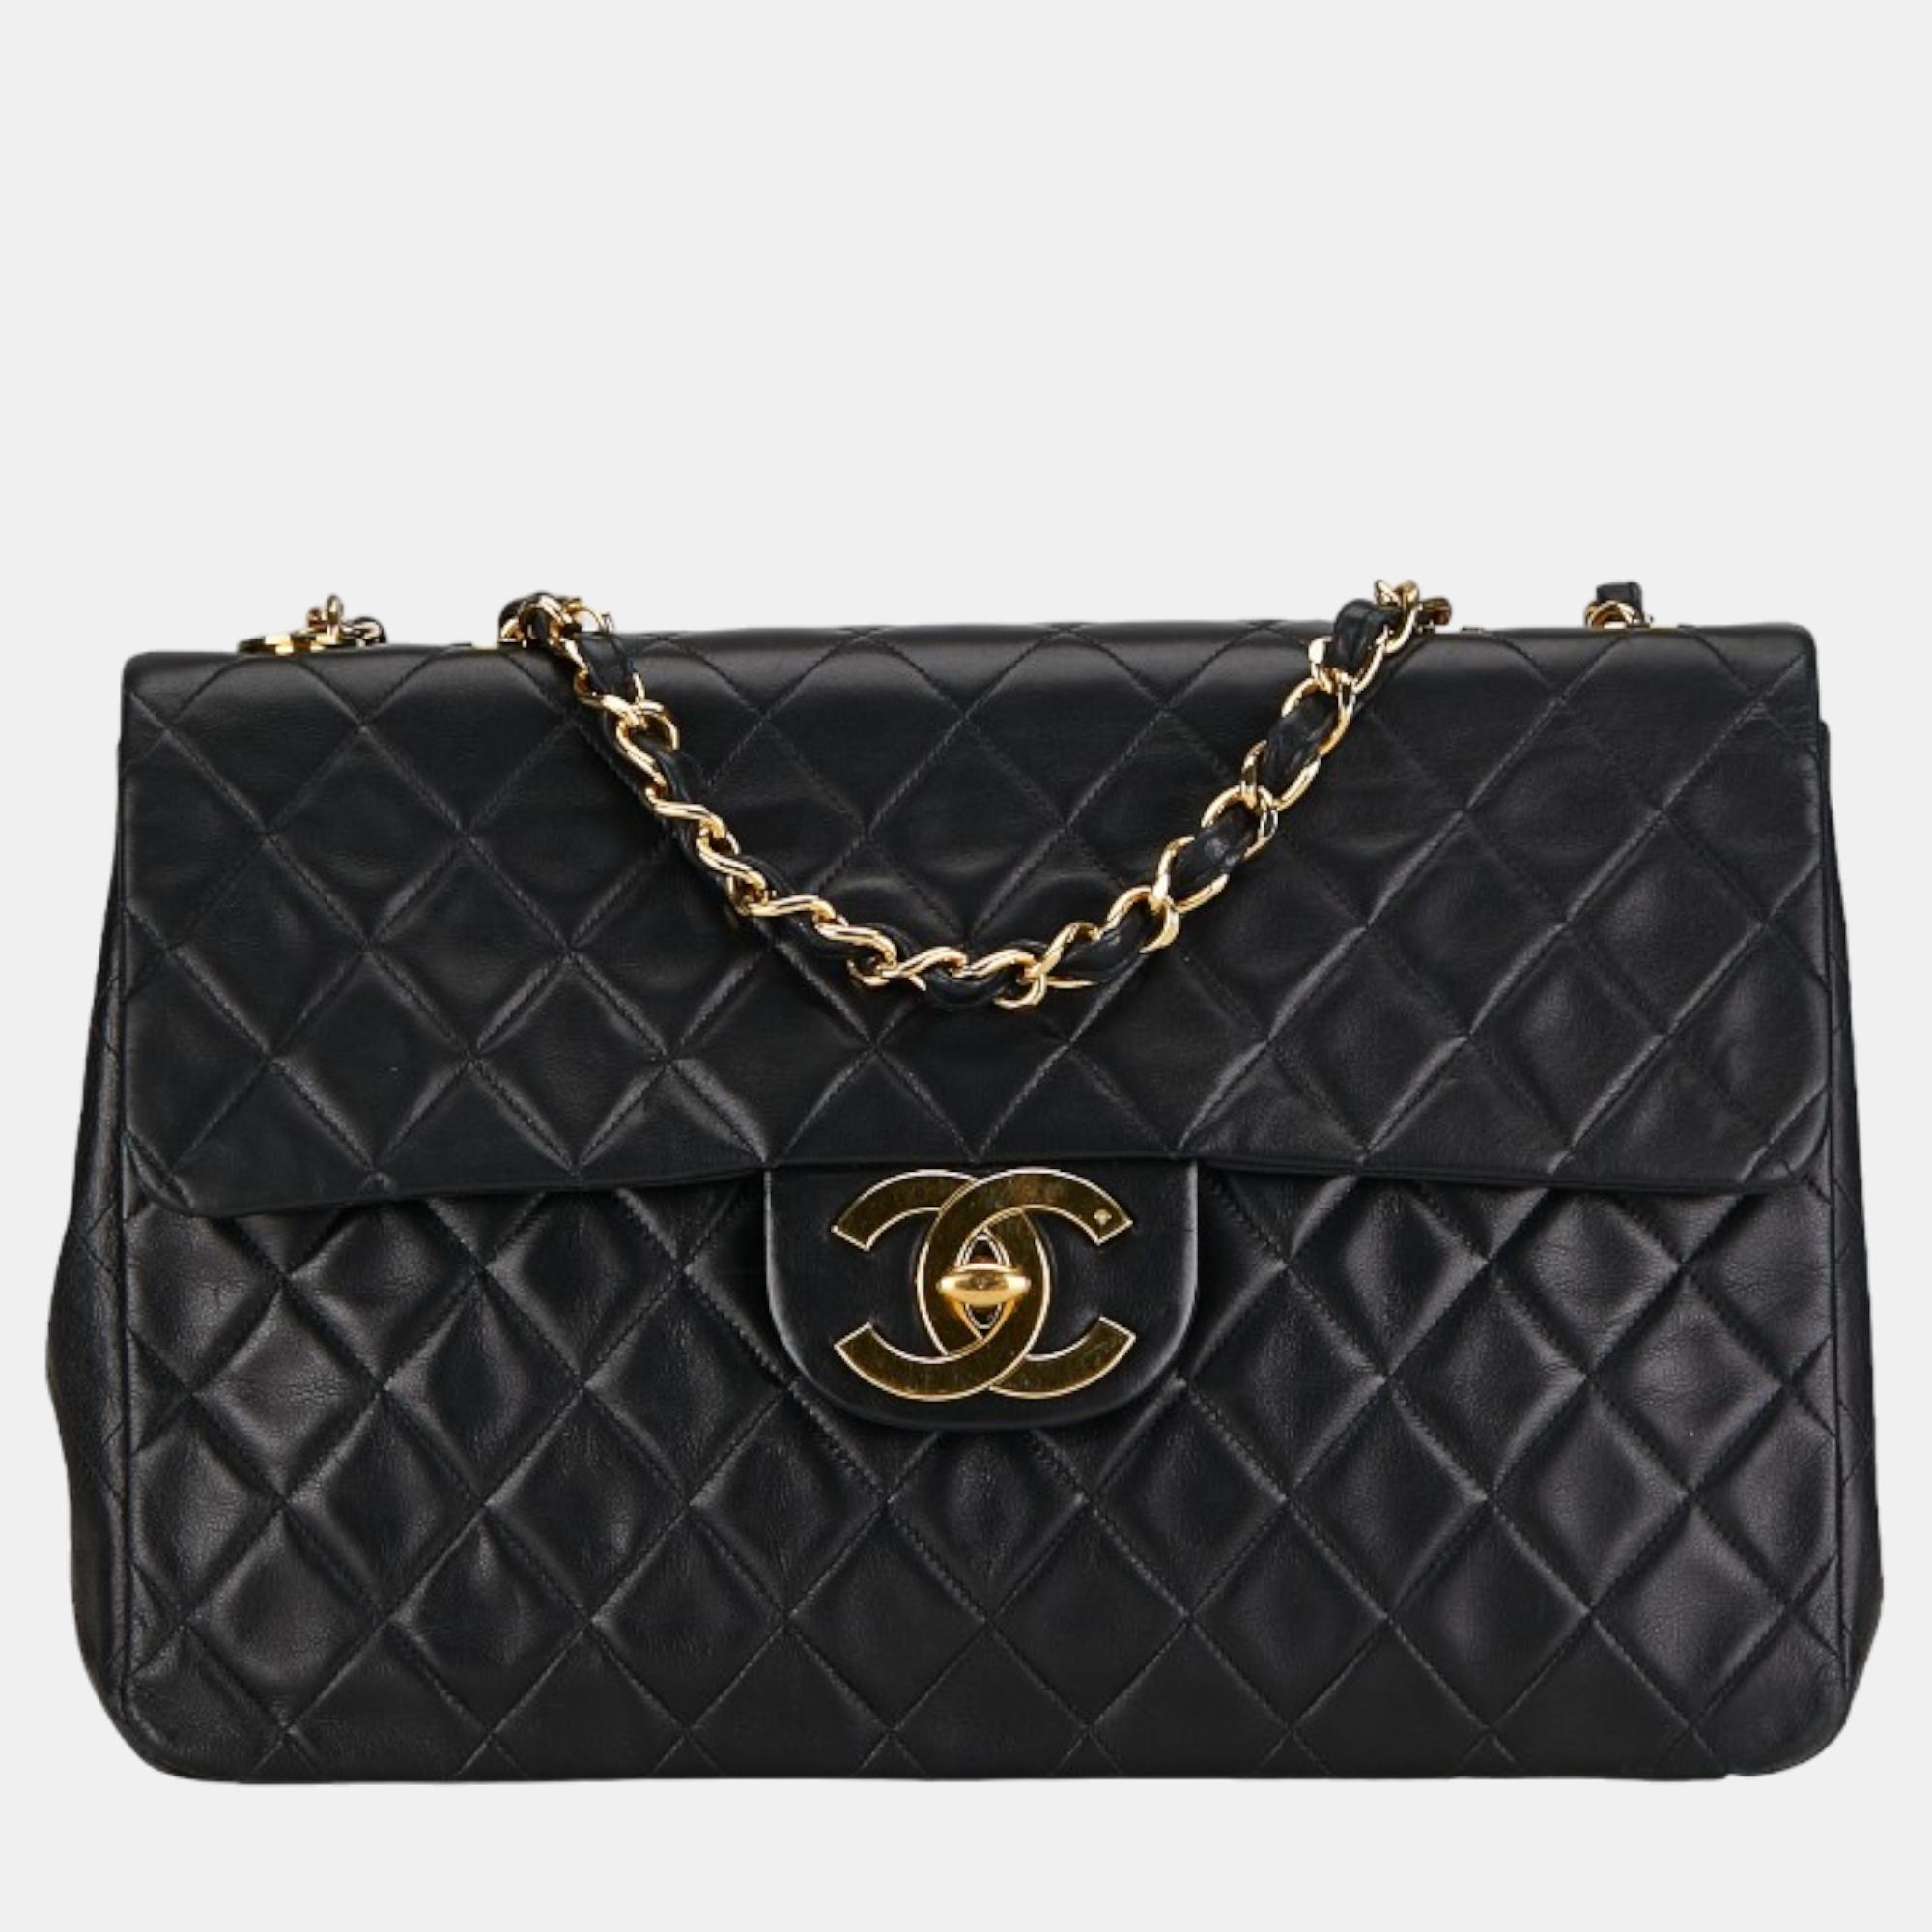 Chanel black leather classic maxi double flap bag